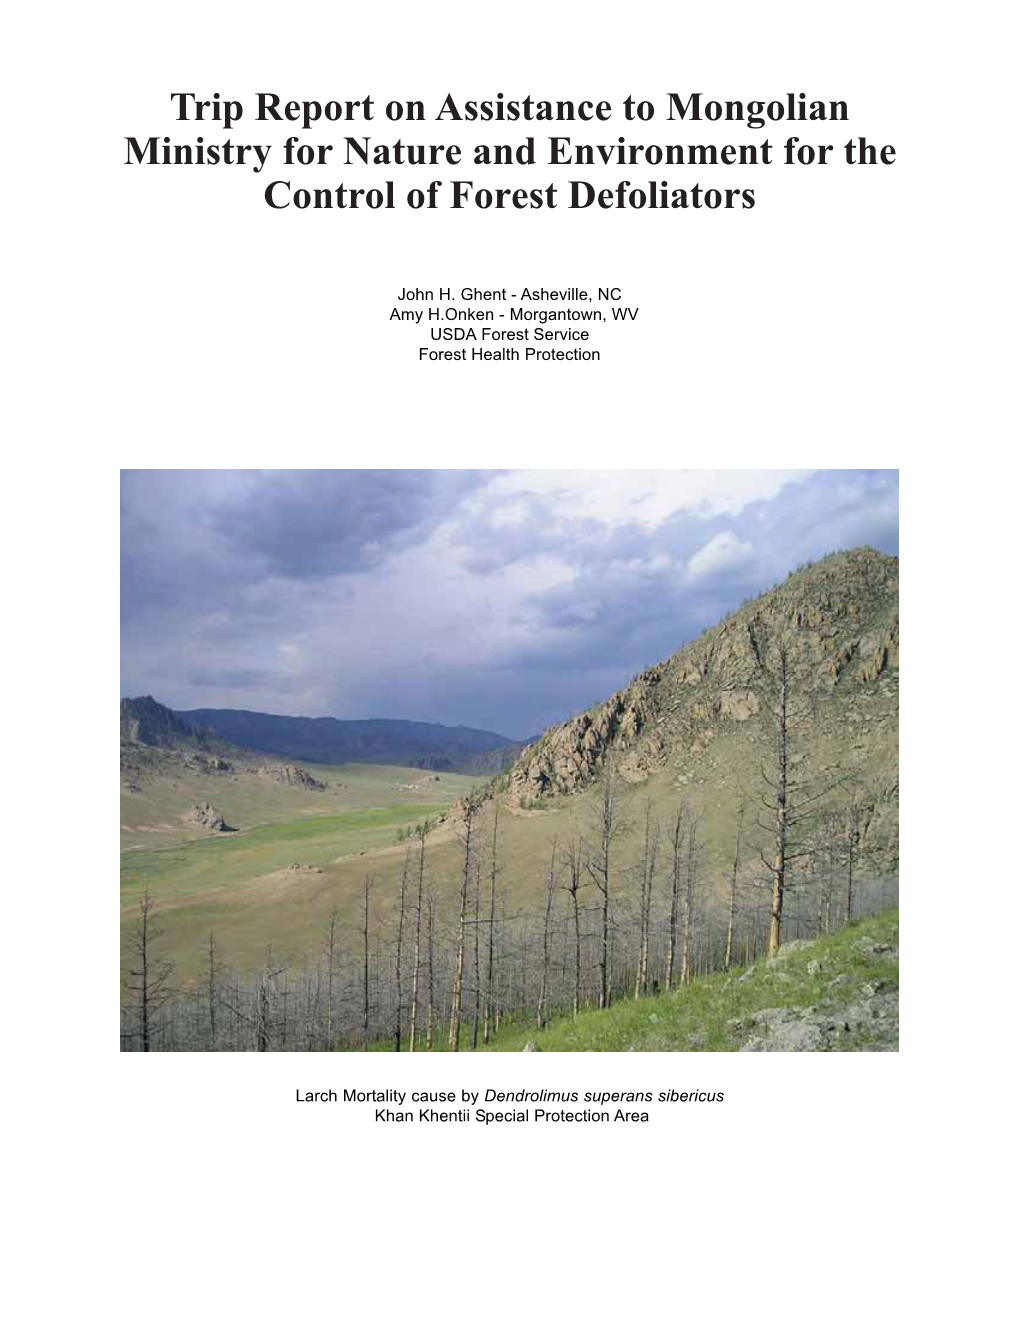 Trip Report on Assistance to Mongolian Ministry for Nature and Environment for the Control of Forest Defoliators